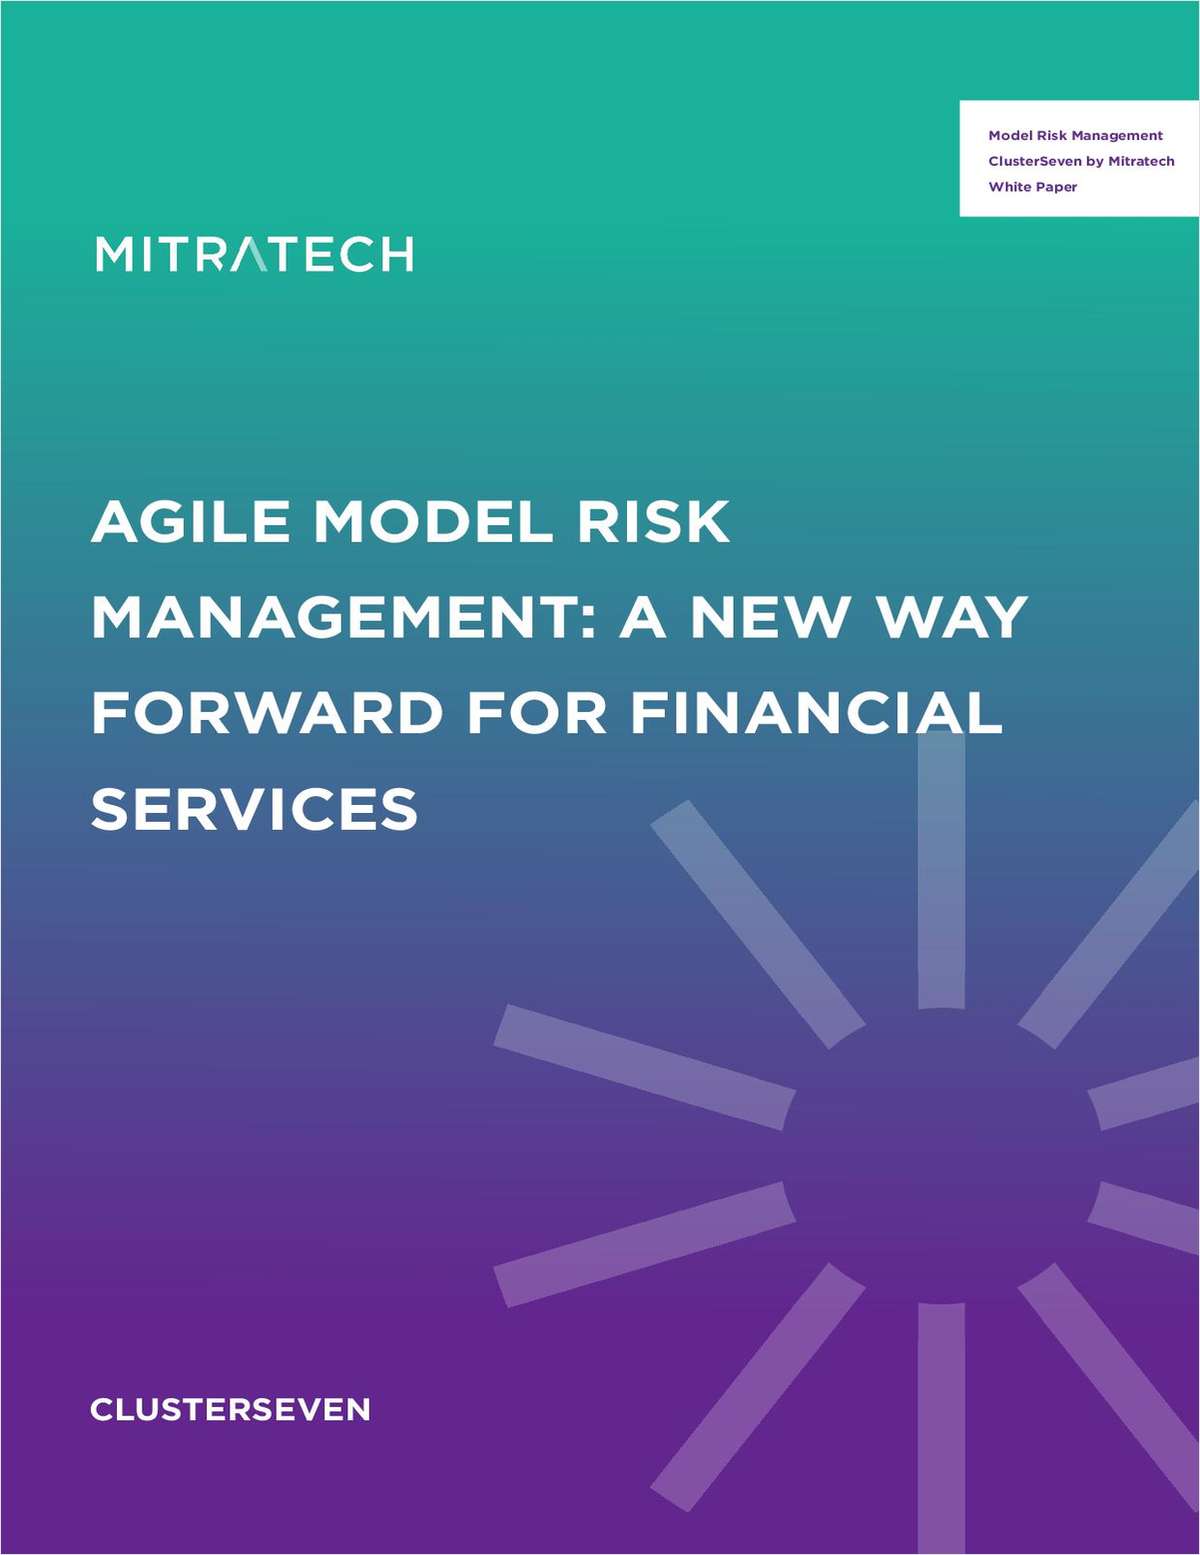 Agile Model Risk Management: A New Way Forward for Financial Services